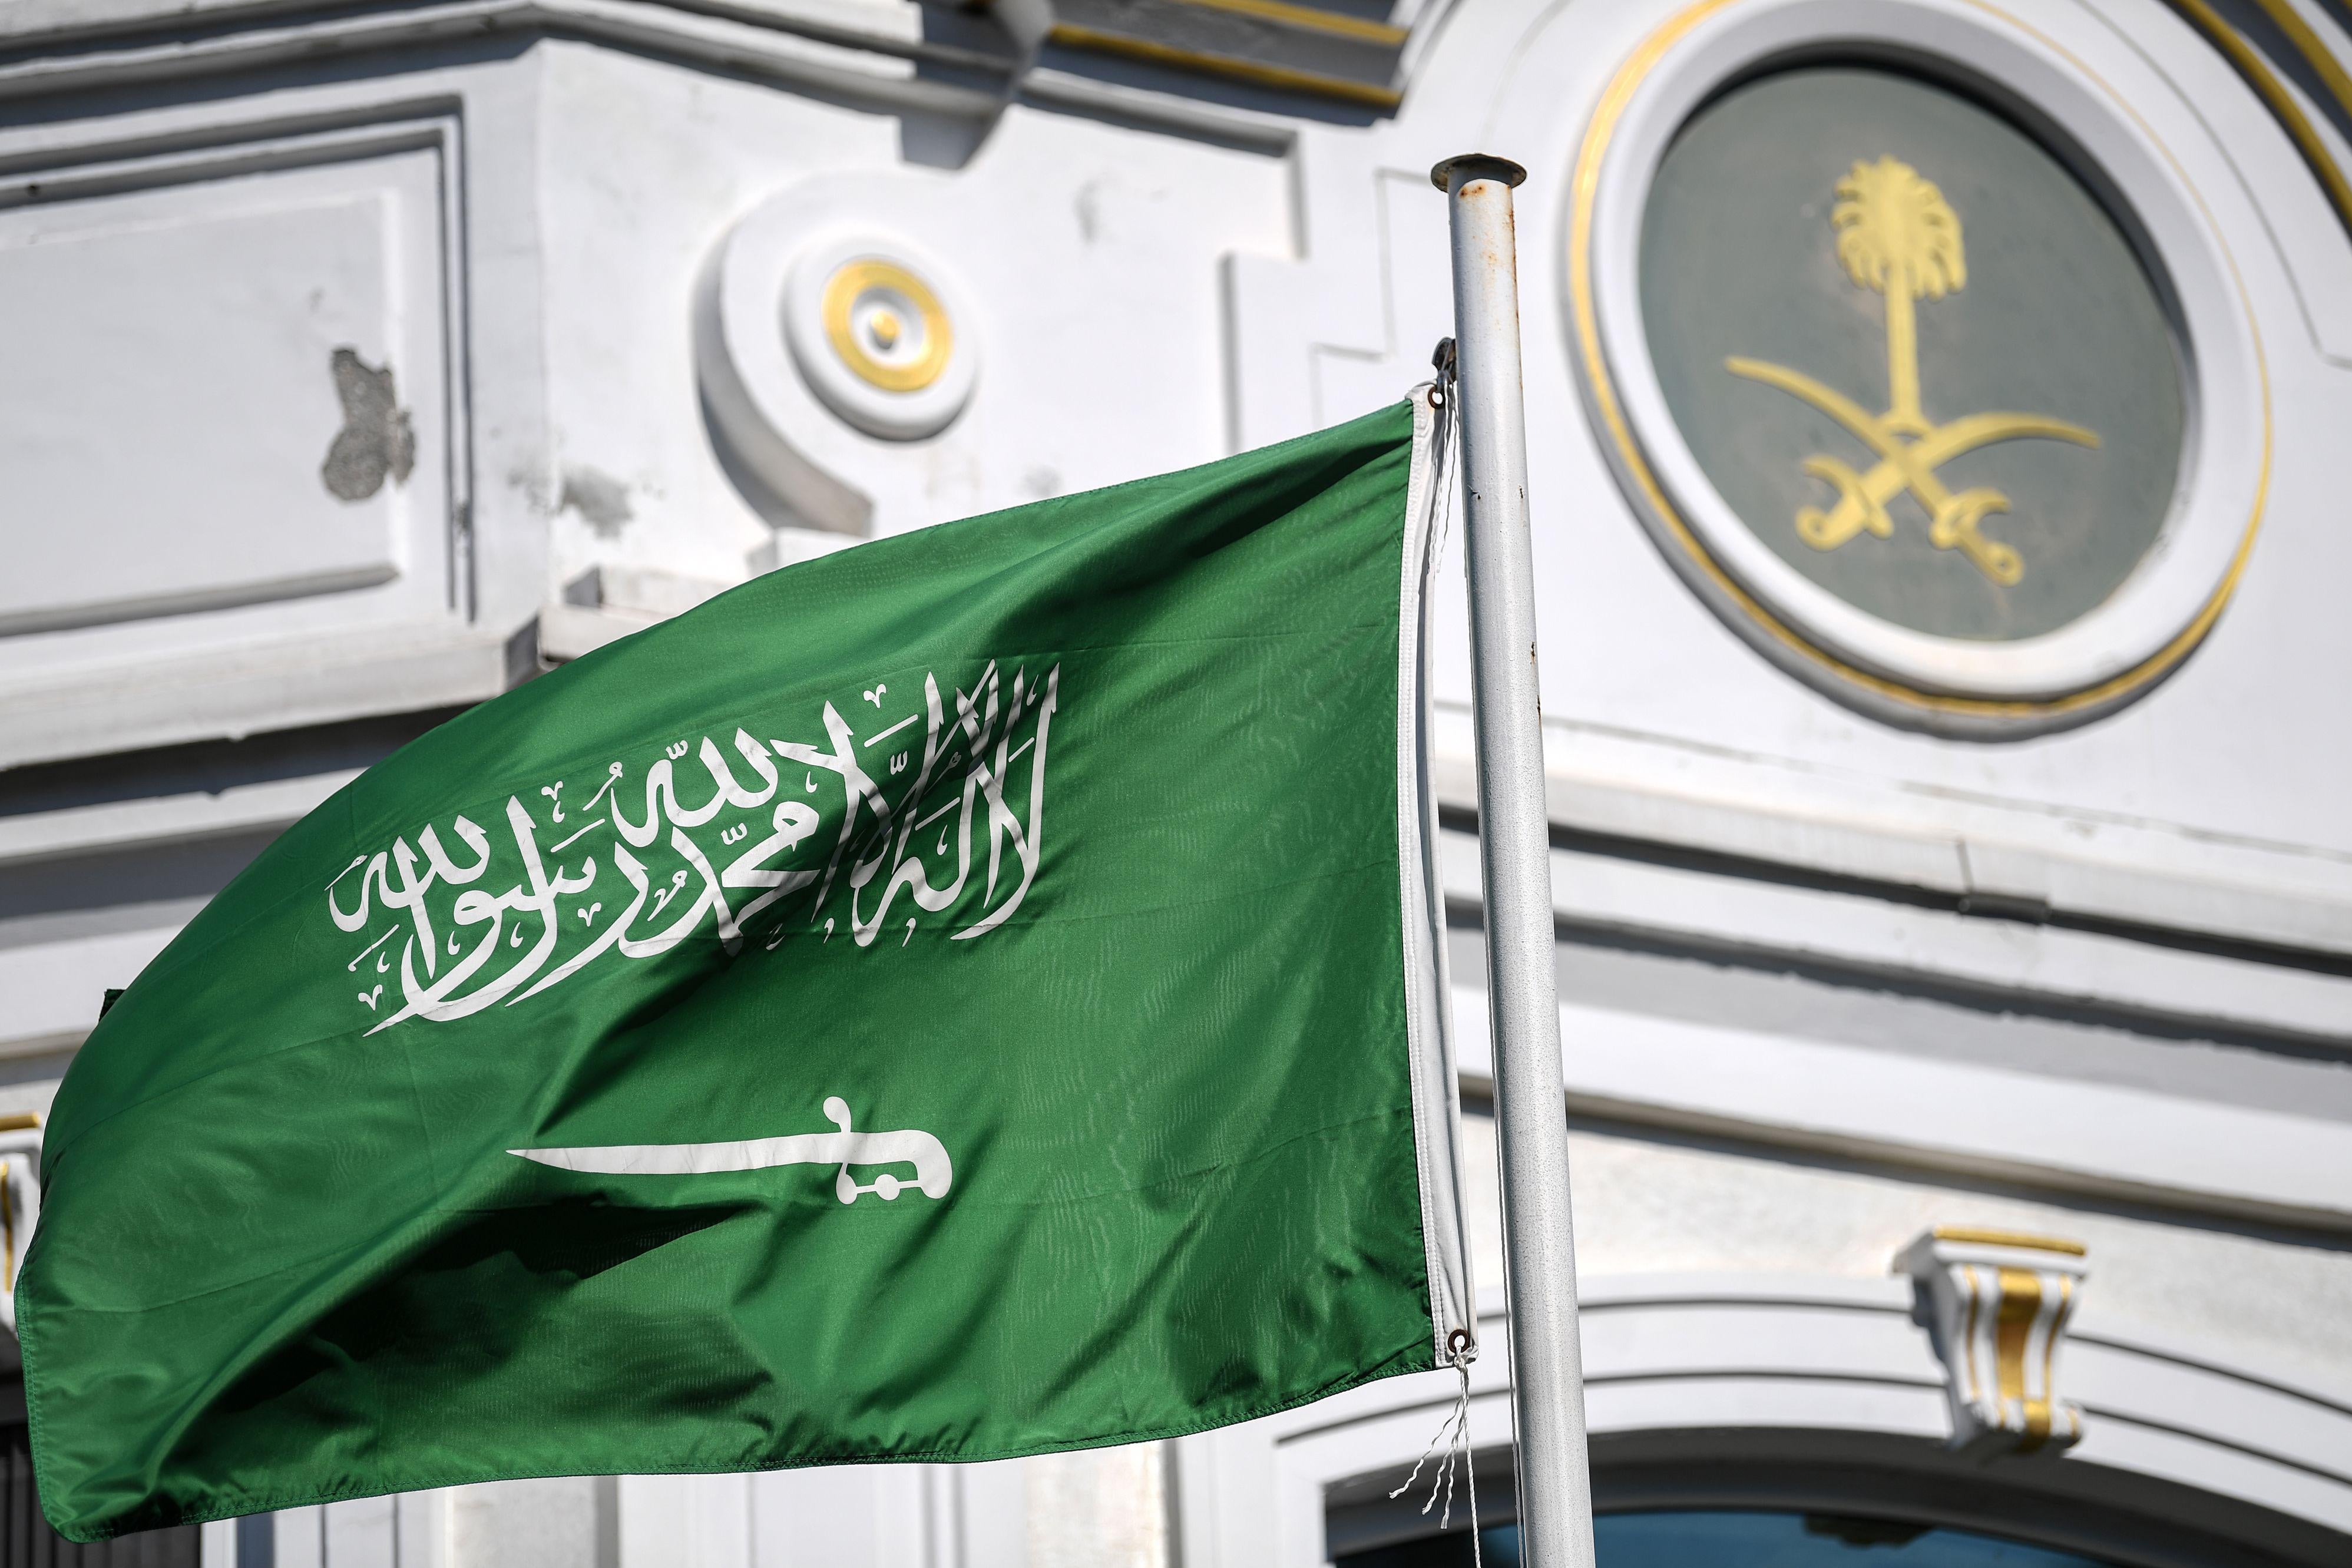 The flag of Saudi Arabia in front of an ornate building.